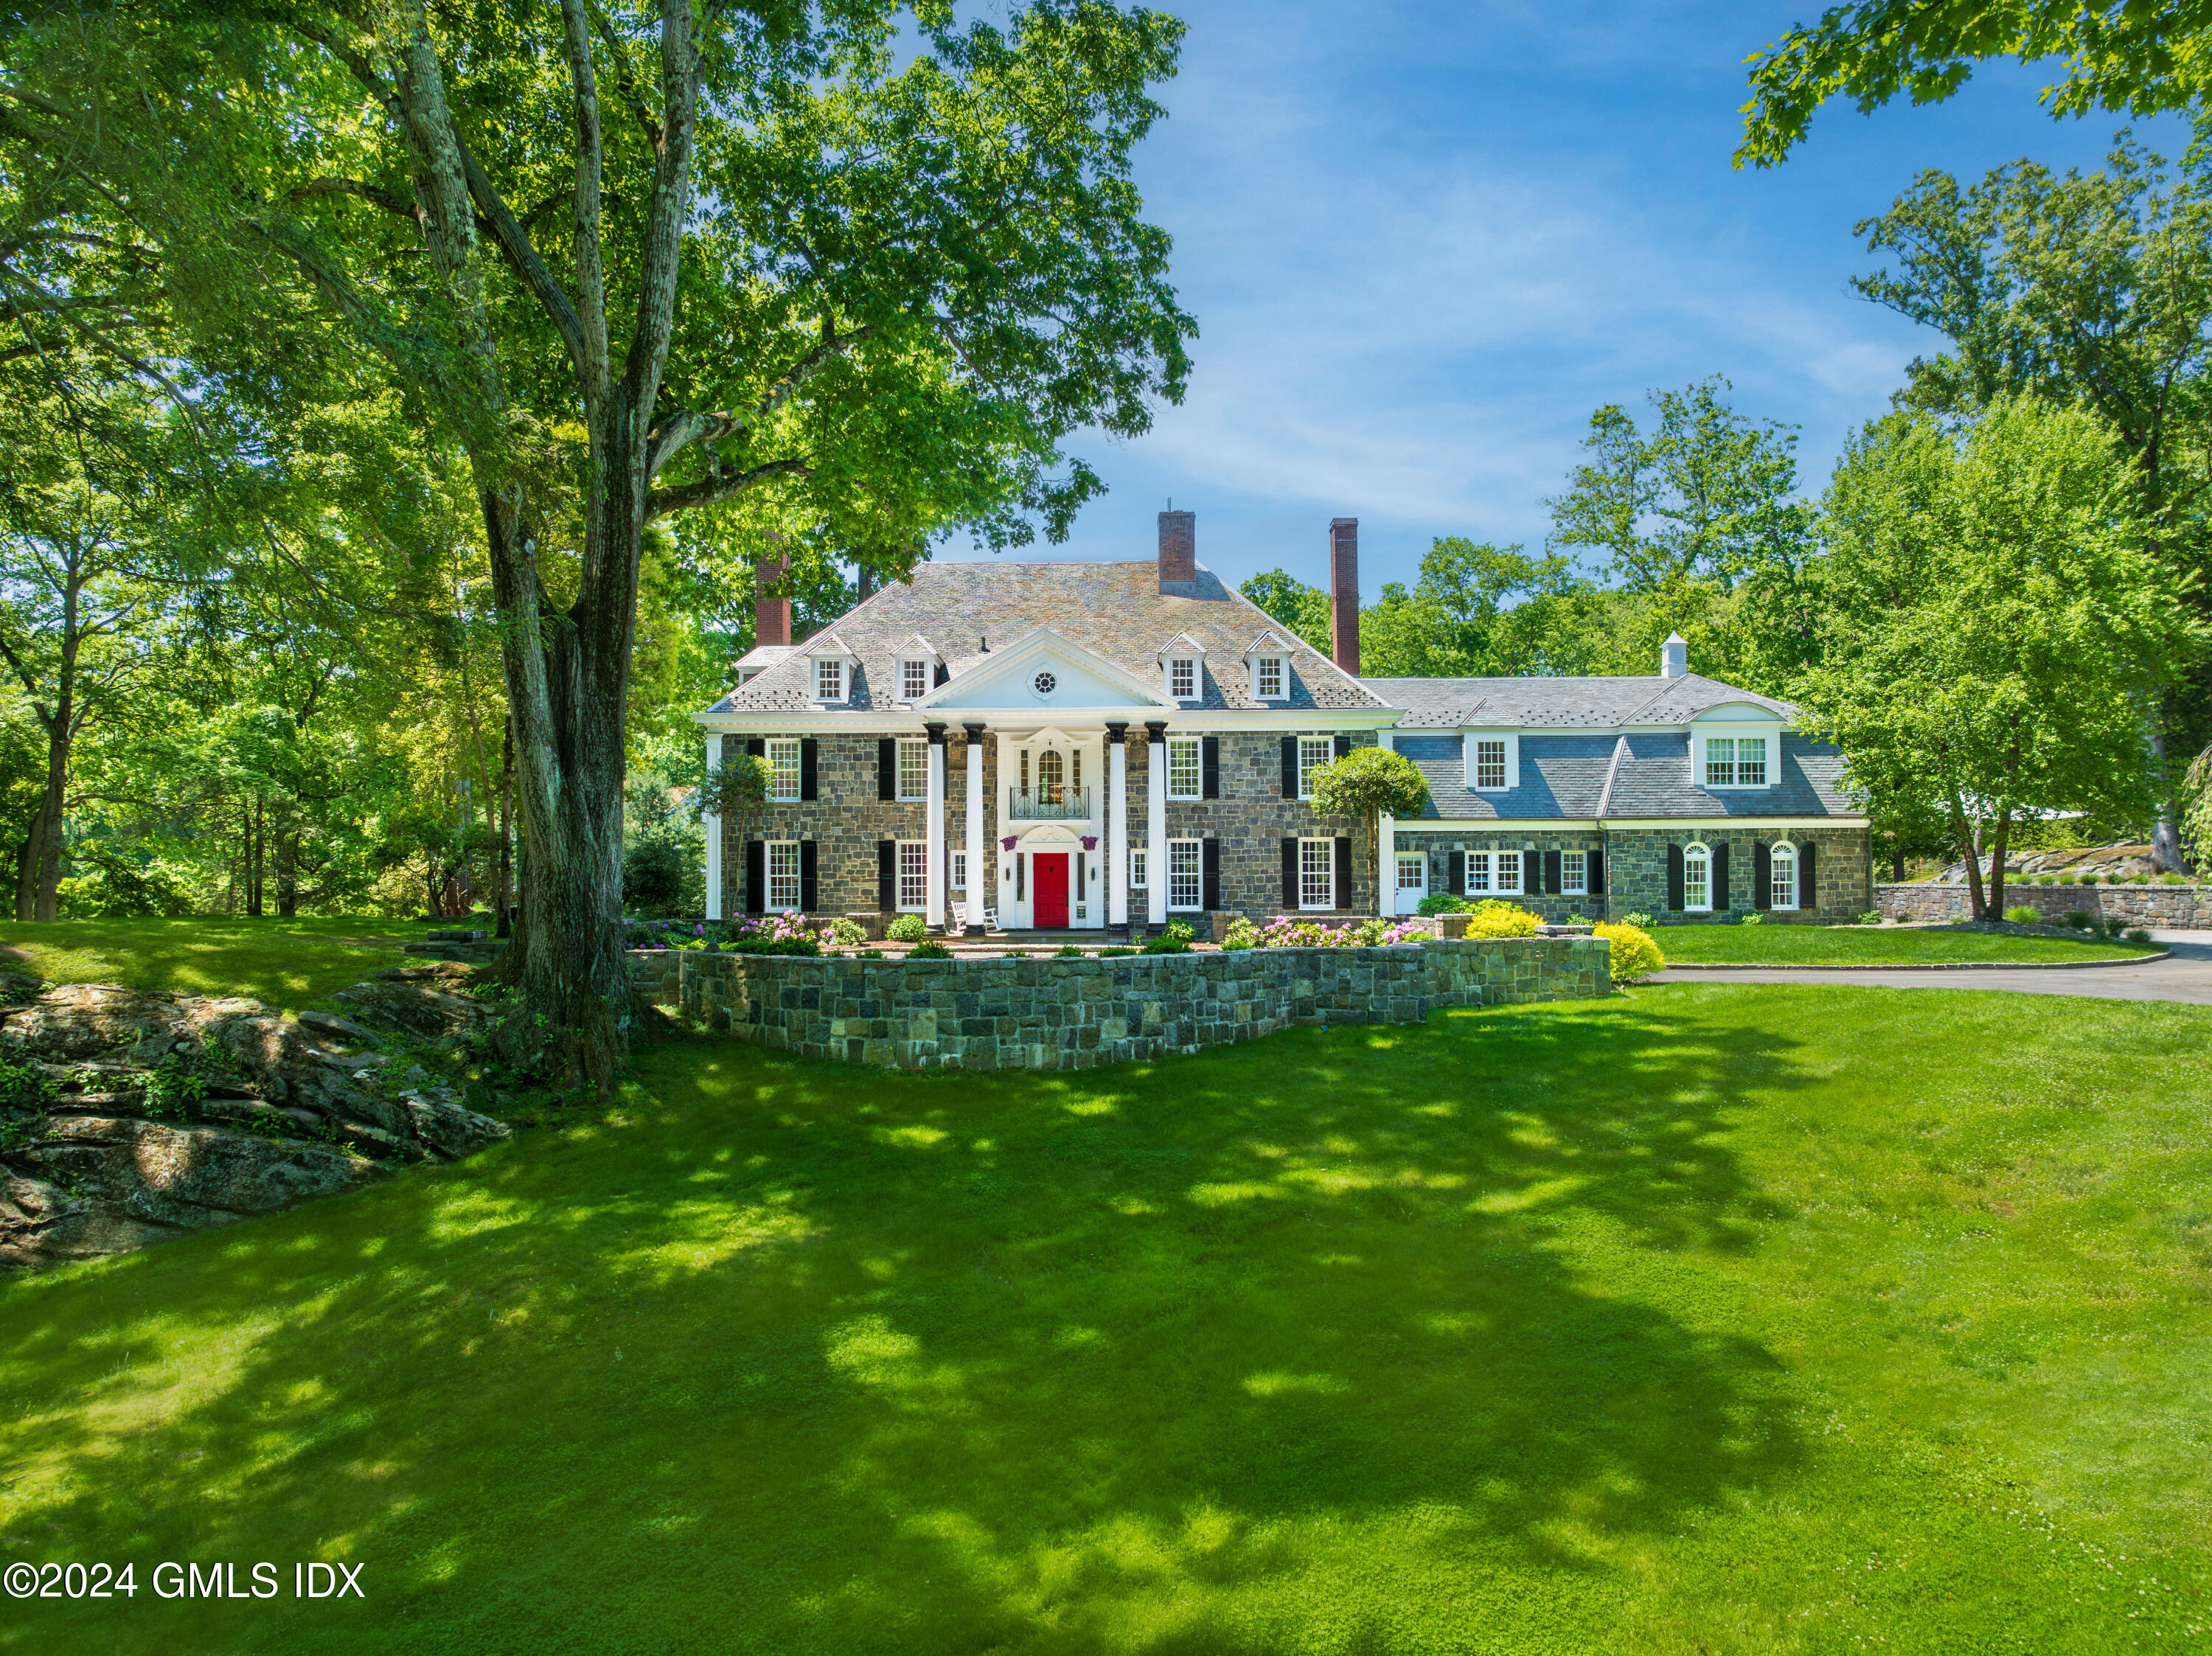 Rental Property at 11 Vineyard Lane, Greenwich, Connecticut - Bedrooms: 7 
Bathrooms: 7.5  - $60,000 MO.